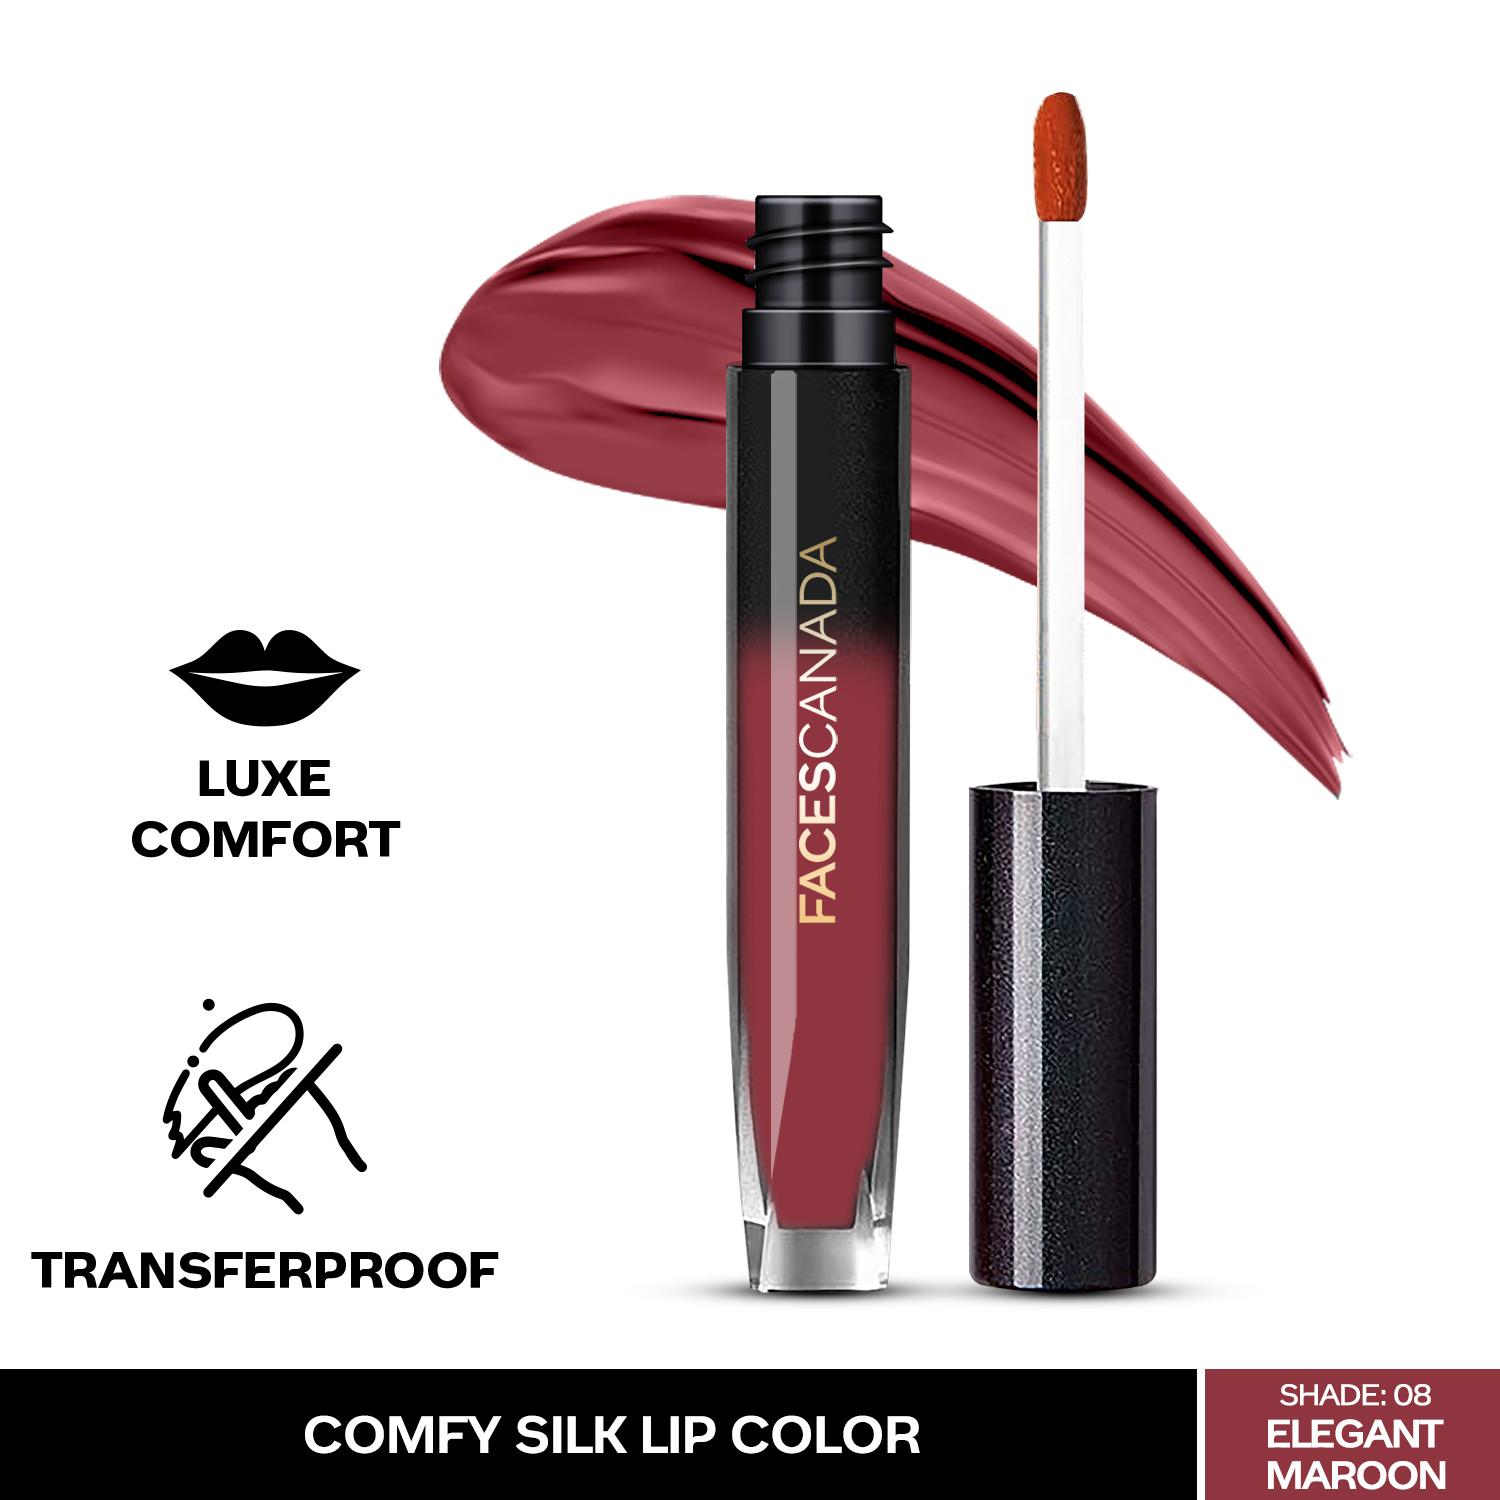 Faces Canada | Faces Canada Comfy Silk Lip Color I Mulberry Oil, Luxe Comfort, No Dryness I Elegant Maroon 08 (3 ml)